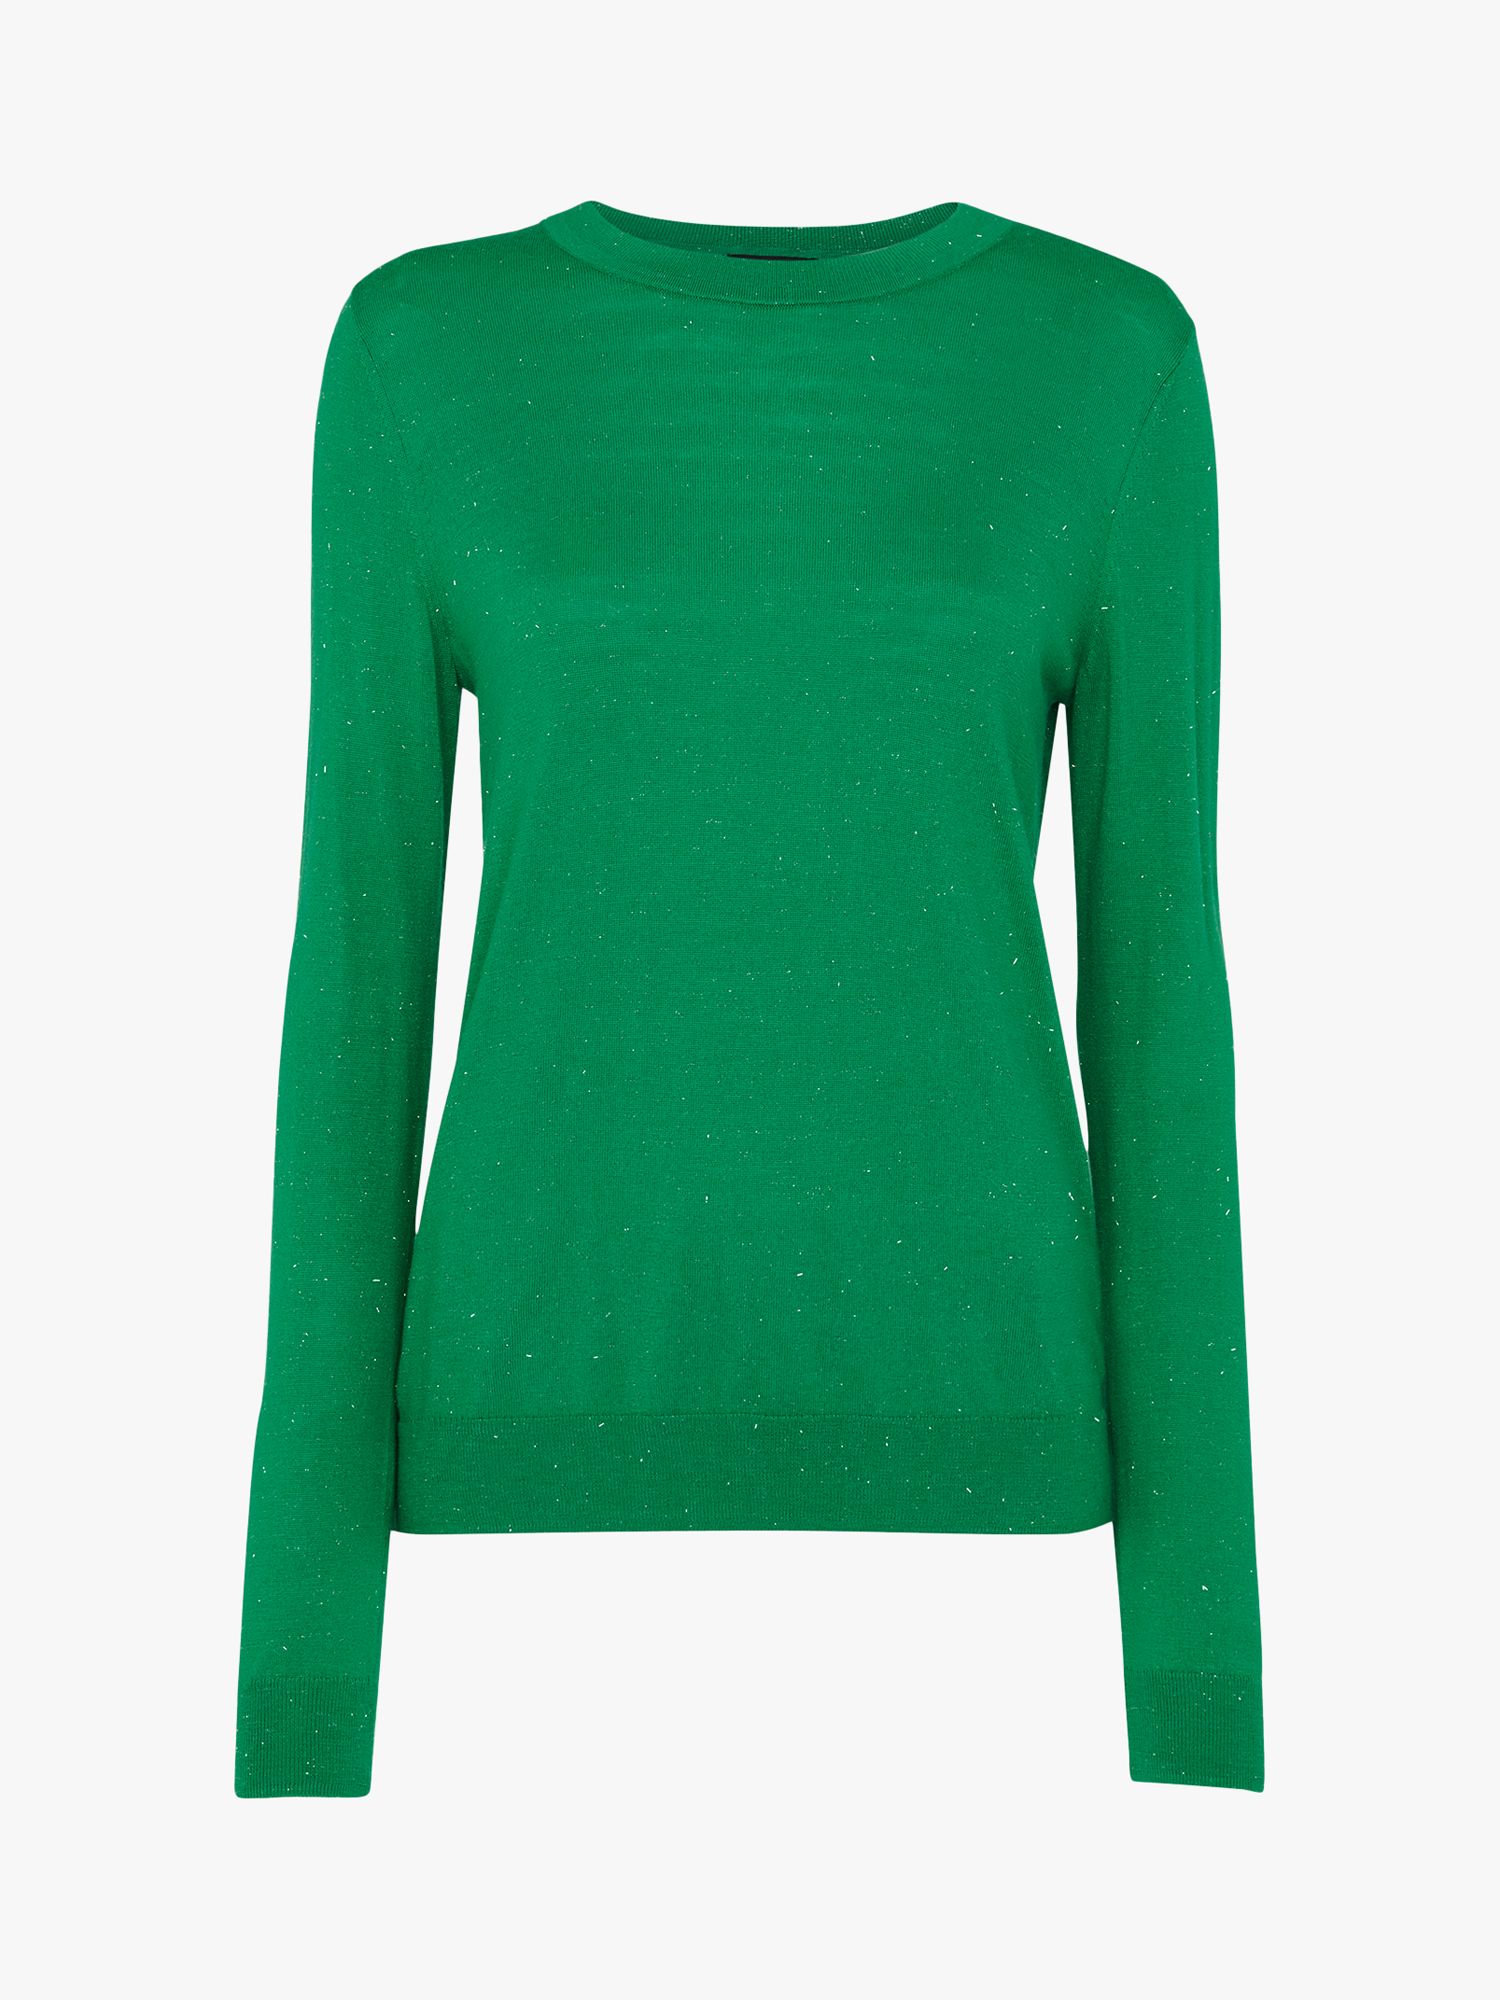 Whistles Annie Sparkle Crew Neck Jumper, Green at John Lewis & Partners